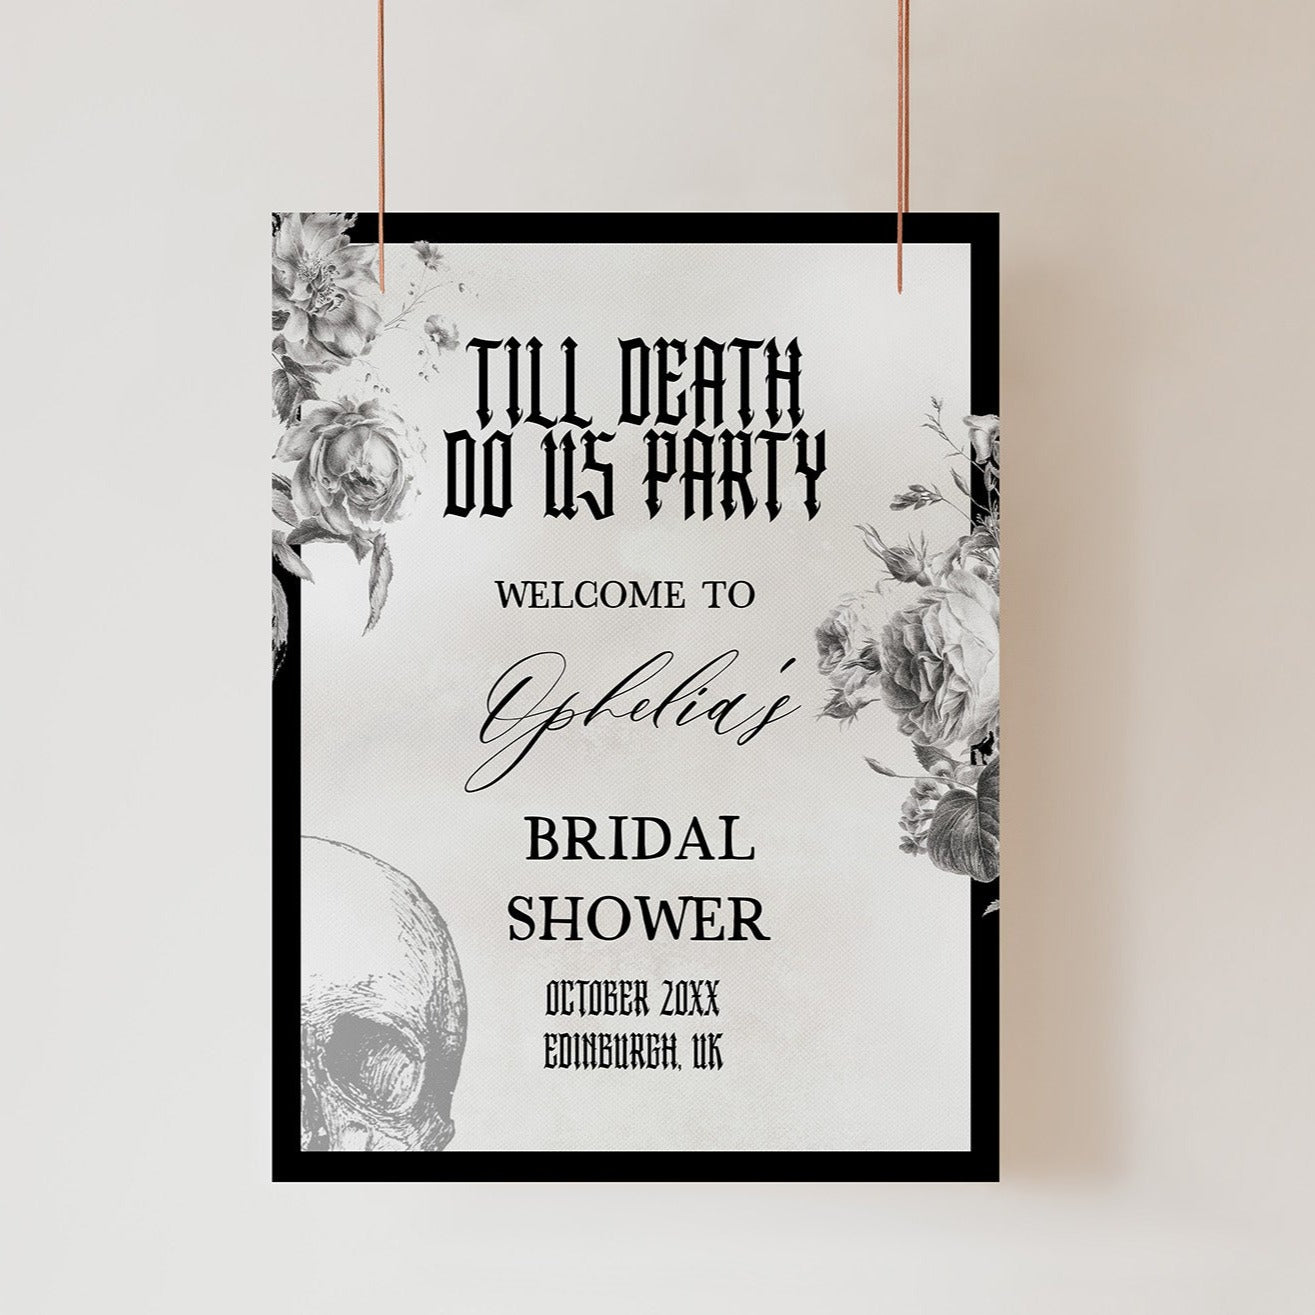 Fully editable and printable bridal shower welcome sign with a gothic design. Perfect for a Bride or Die or Death Us To Party bridal shower themed party